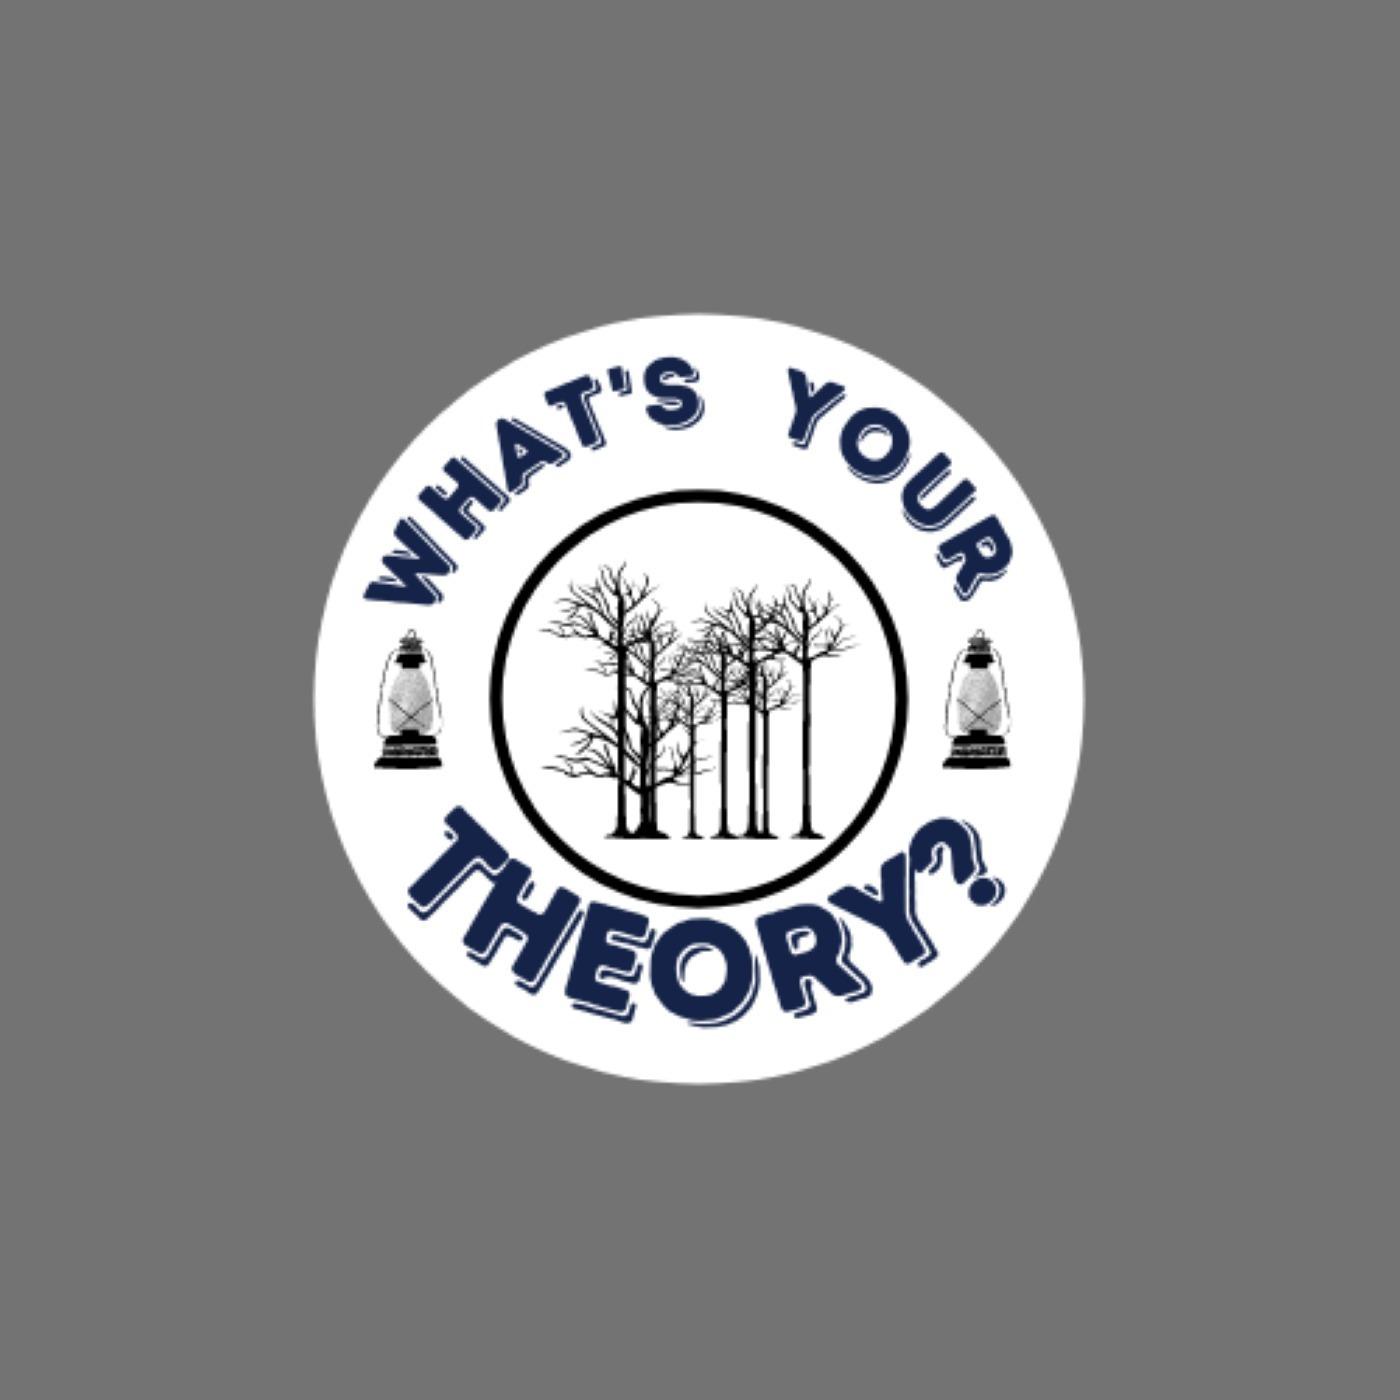 What's Your Theory?